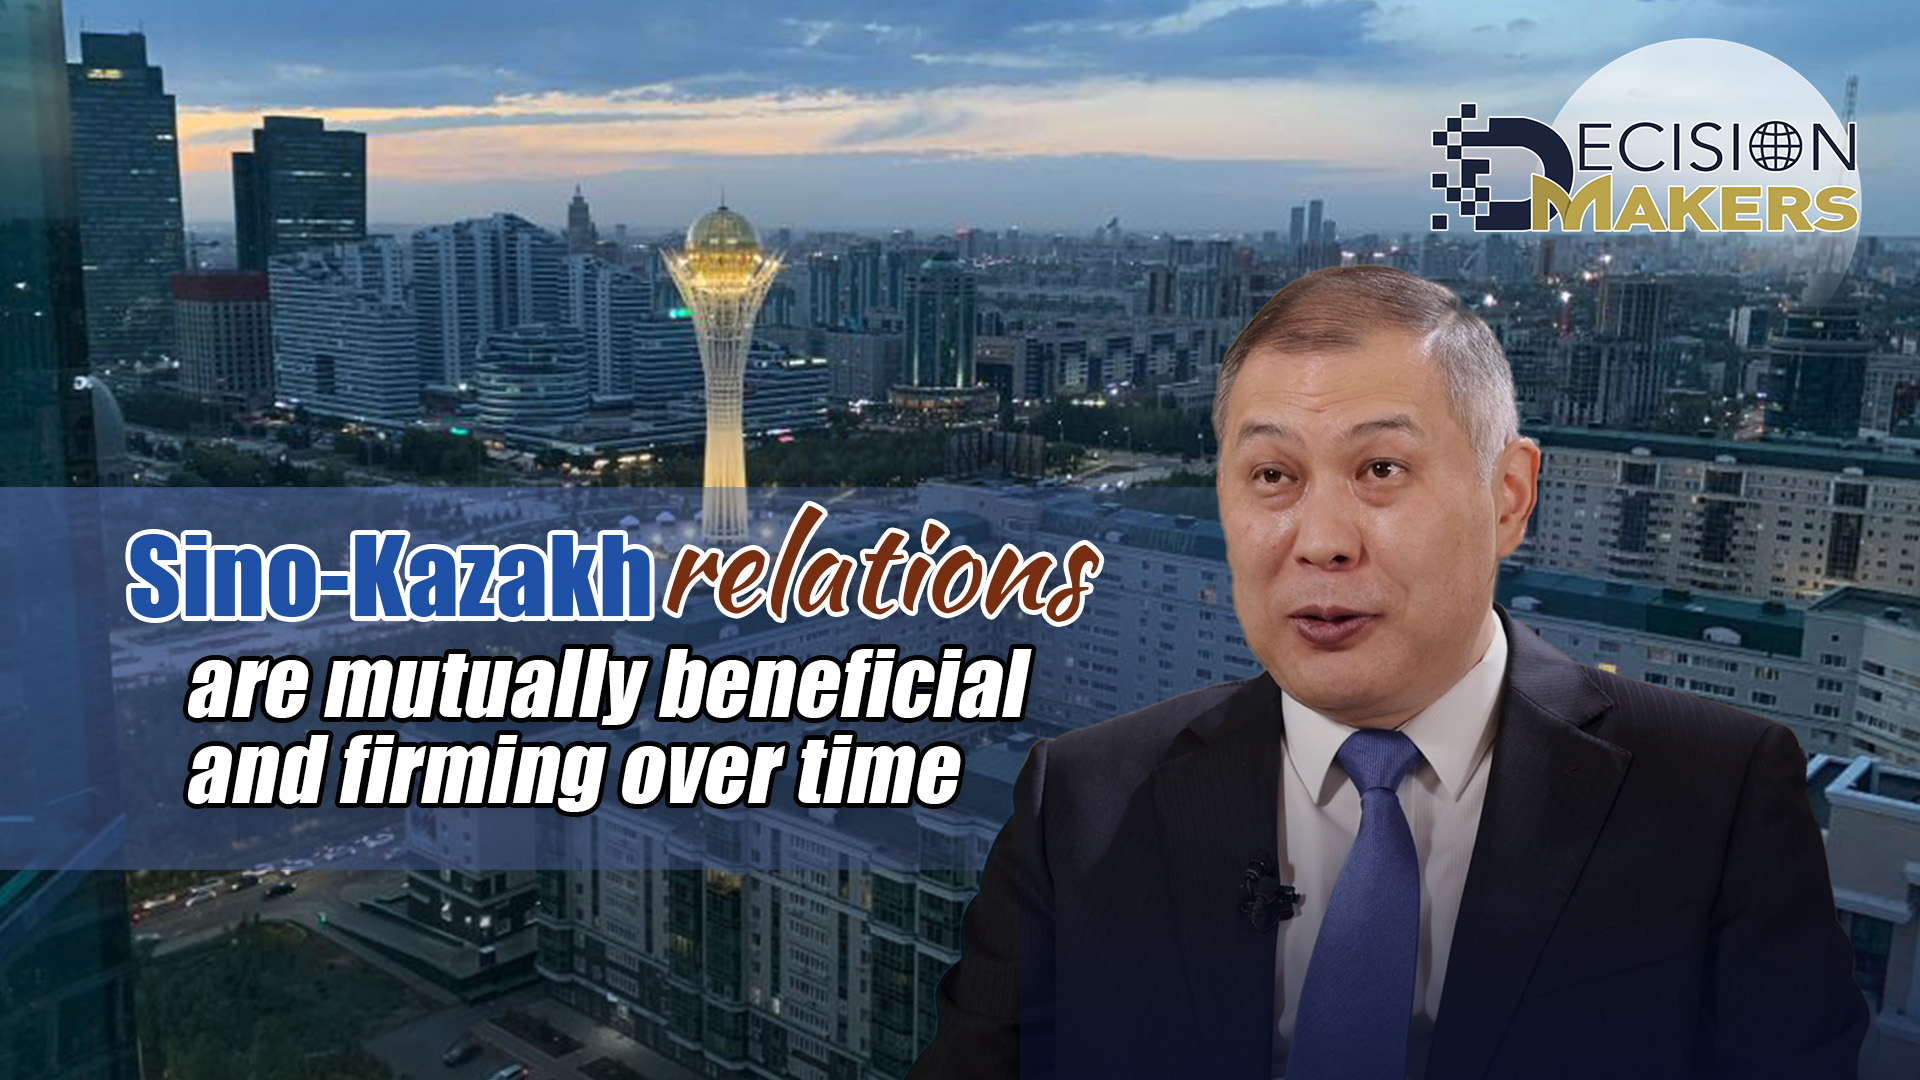 Sino-Kazakh relations are mutually beneficial and firming over time